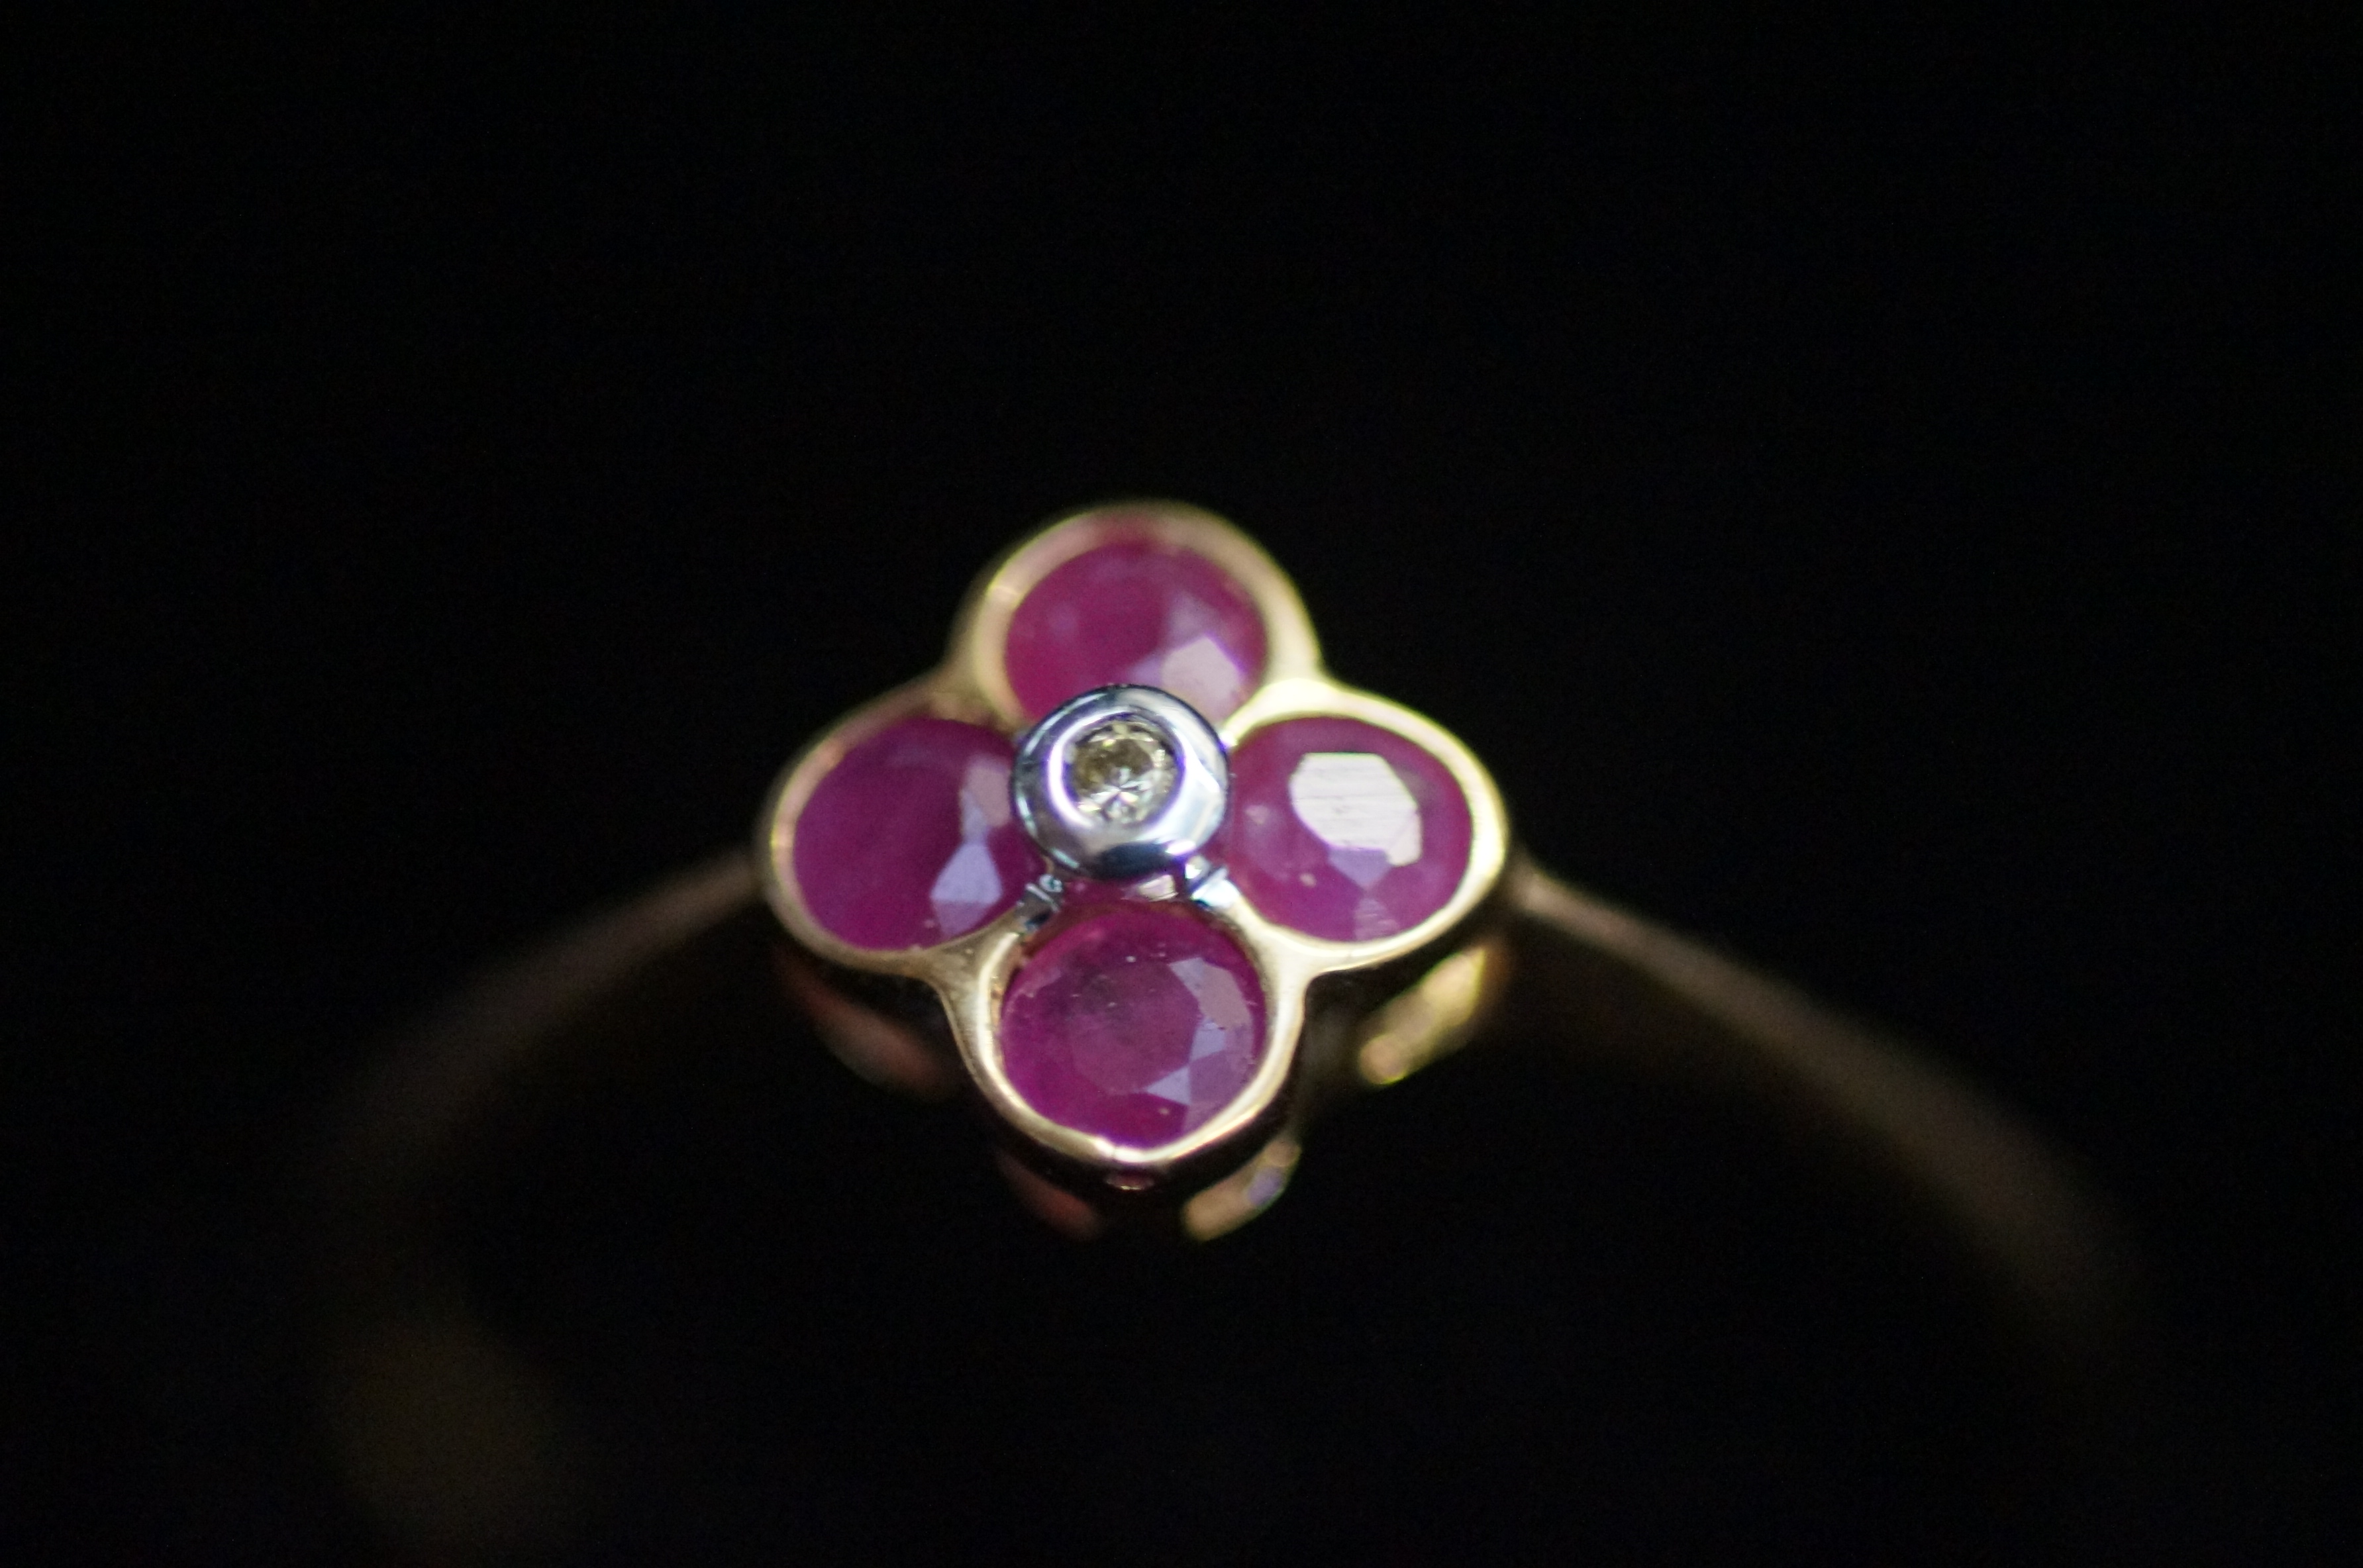 9ct Gold ring set with 4 garnets & central diamond